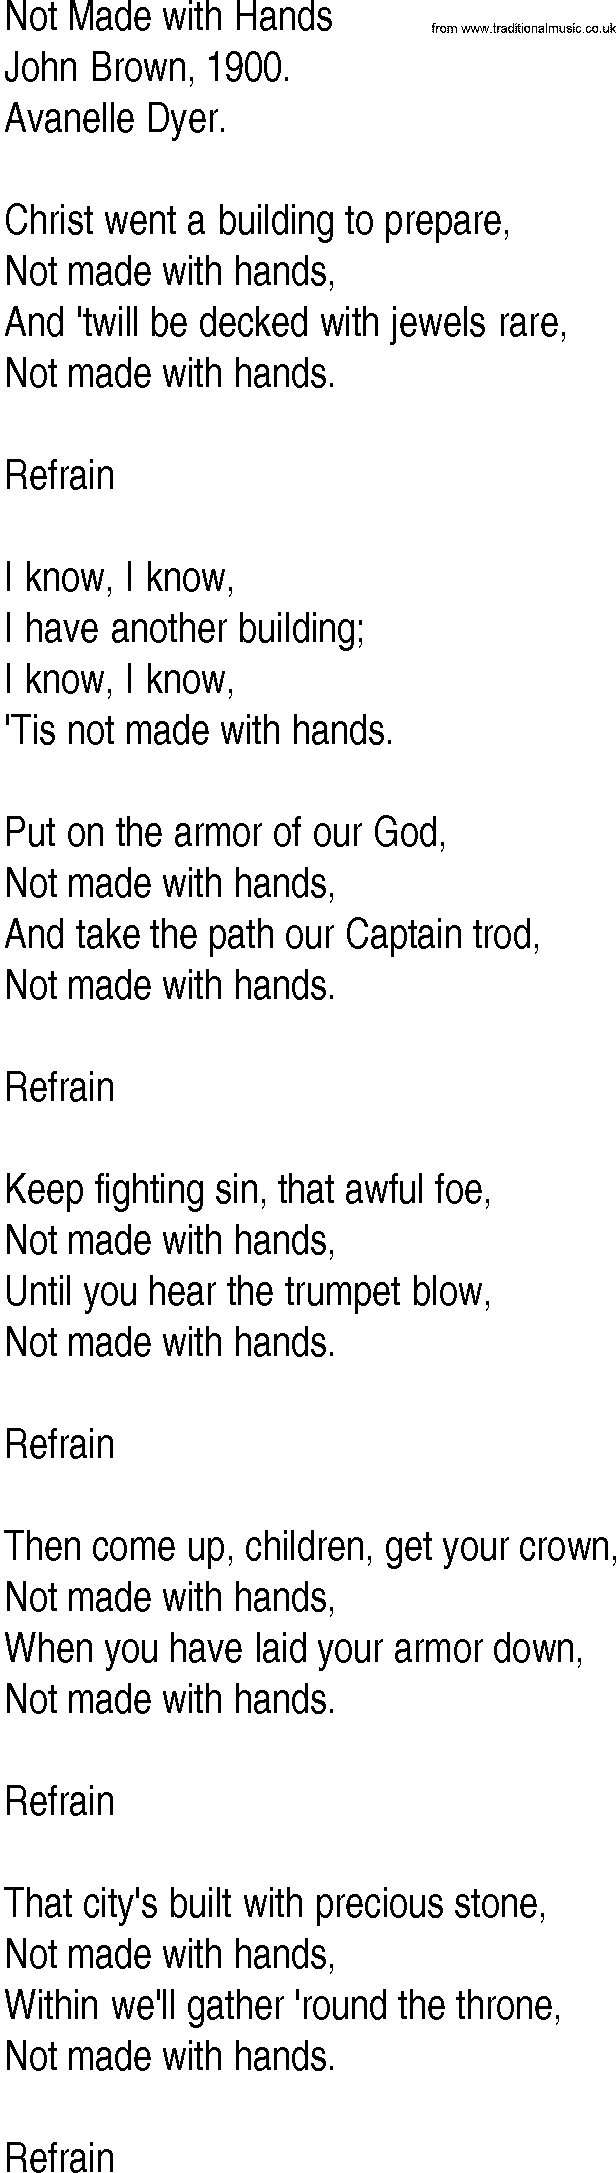 Hymn and Gospel Song: Not Made with Hands by John Brown lyrics